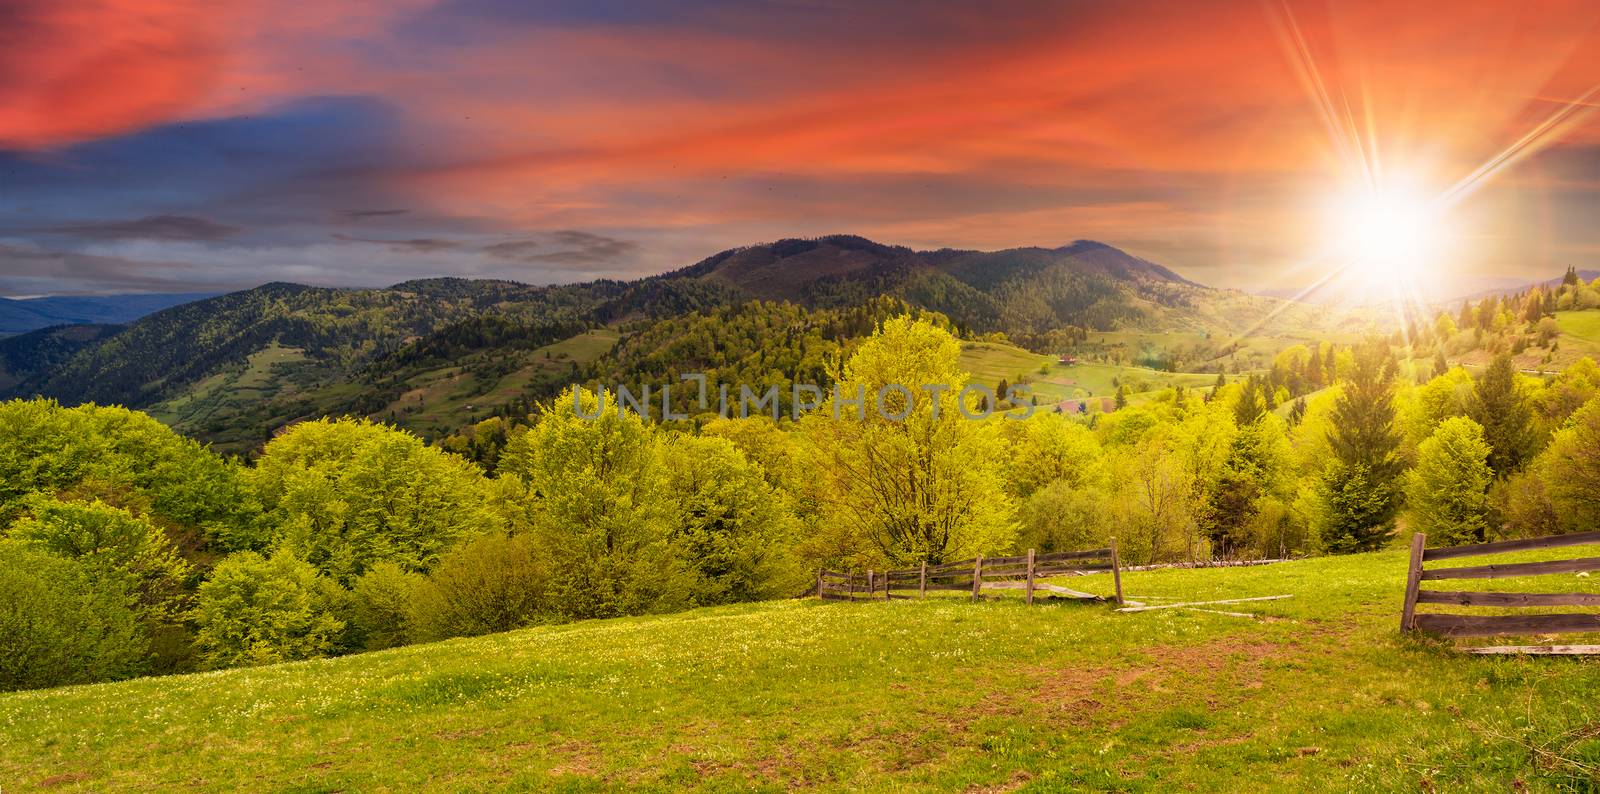 fence on hillside meadow in mountain at sunset by Pellinni